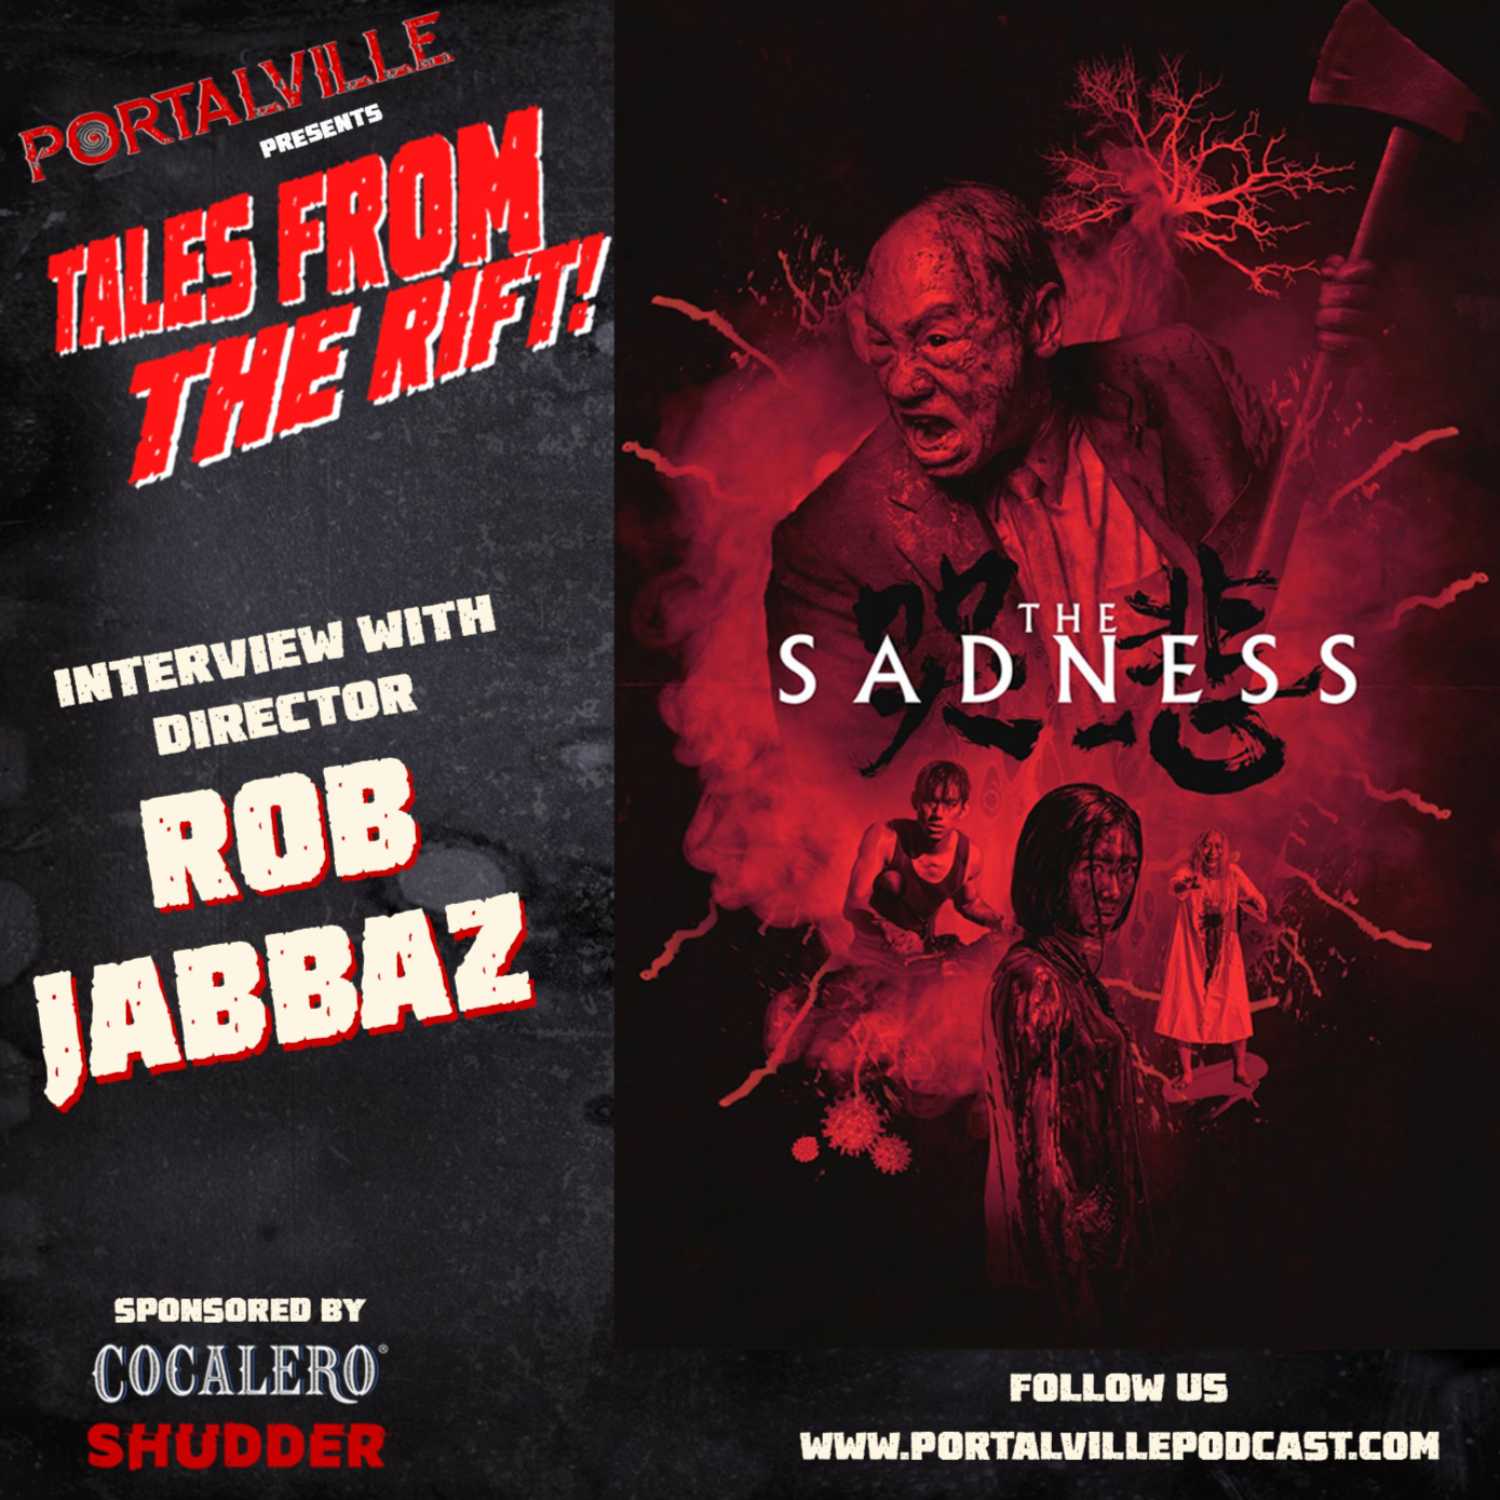 The Sadness! Interview with Director Rob Jabbaz Image